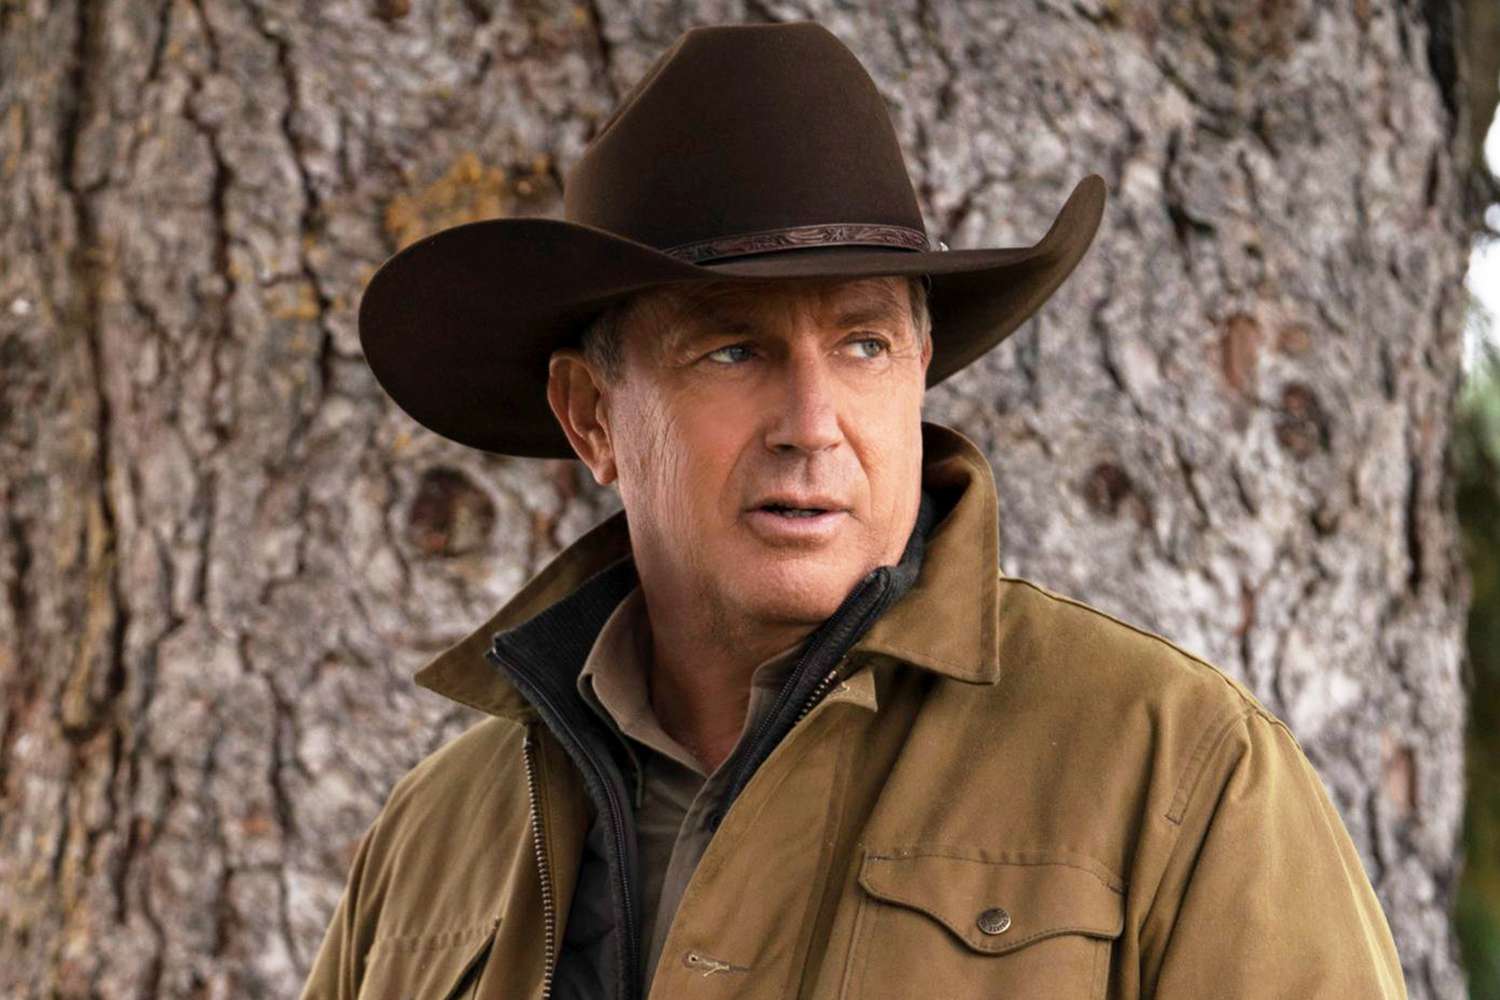 Yellowstone star Kevin Costner